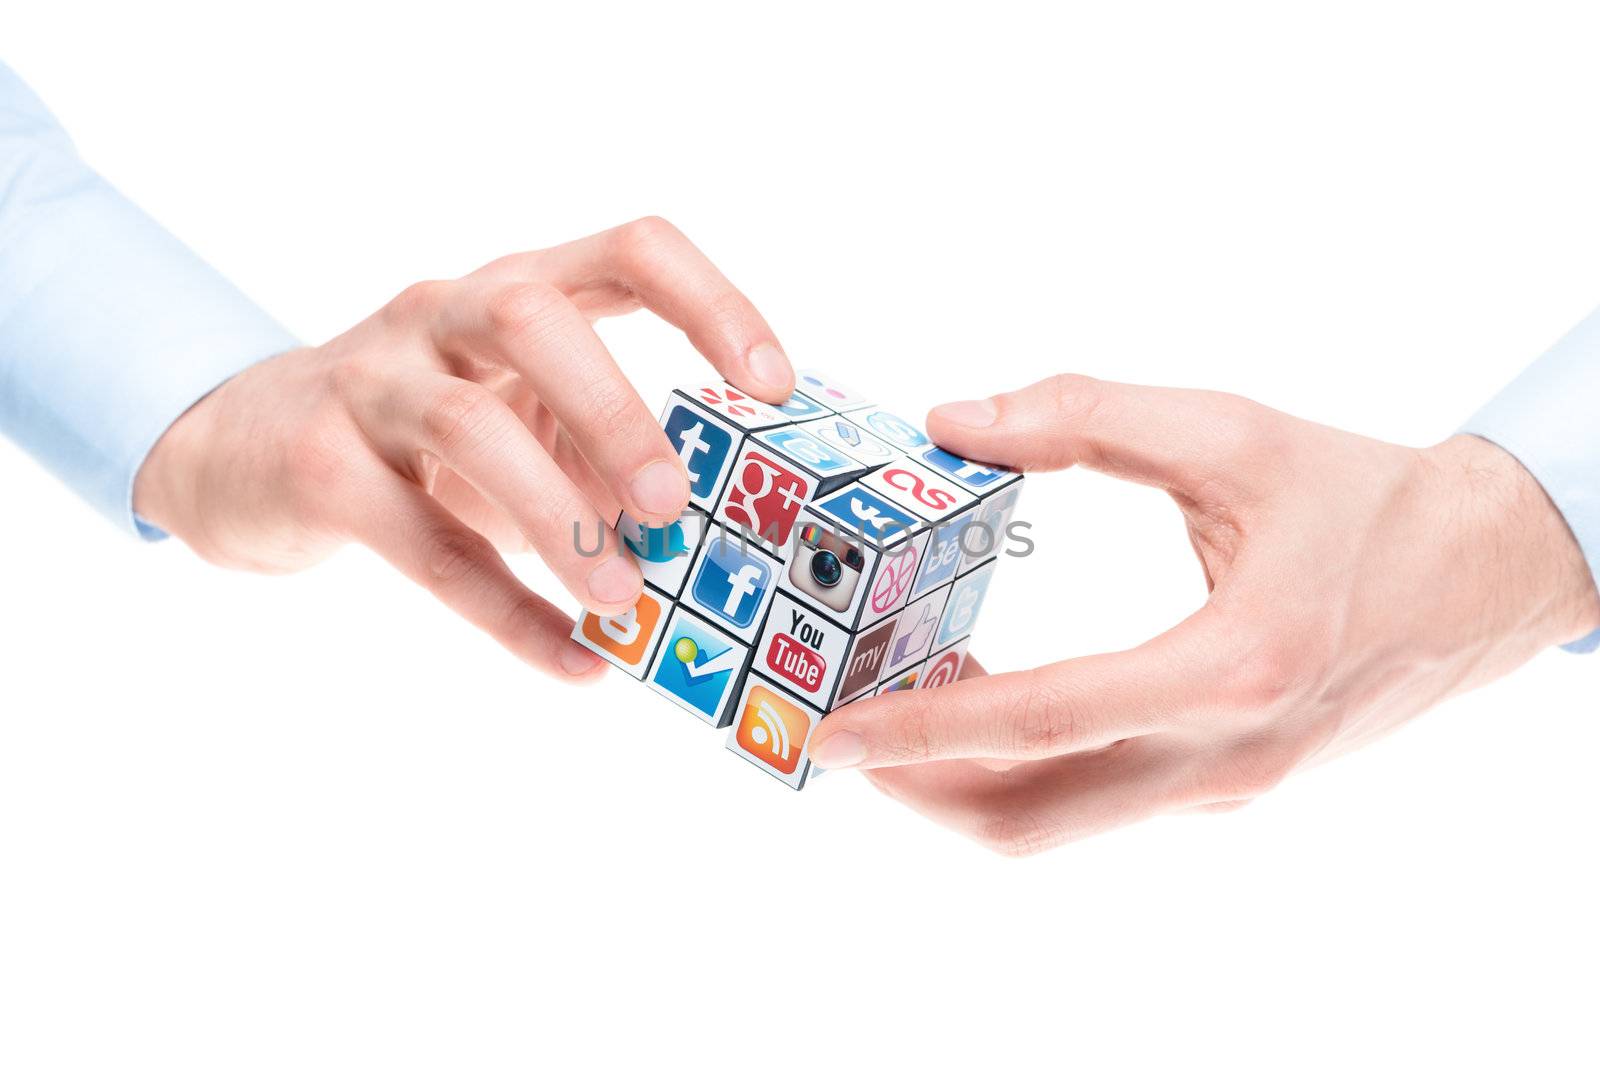 Kiev, Ukraine - February 2, 2013: A hands holding rubik's cube with logotypes of well-known social media brand's. Include Facebook, YouTube, Twitter, Google Plus, Instagram, Vimeo, Flickr, Myspace, Tumblr, Livejournal, Foursquare and other logos.